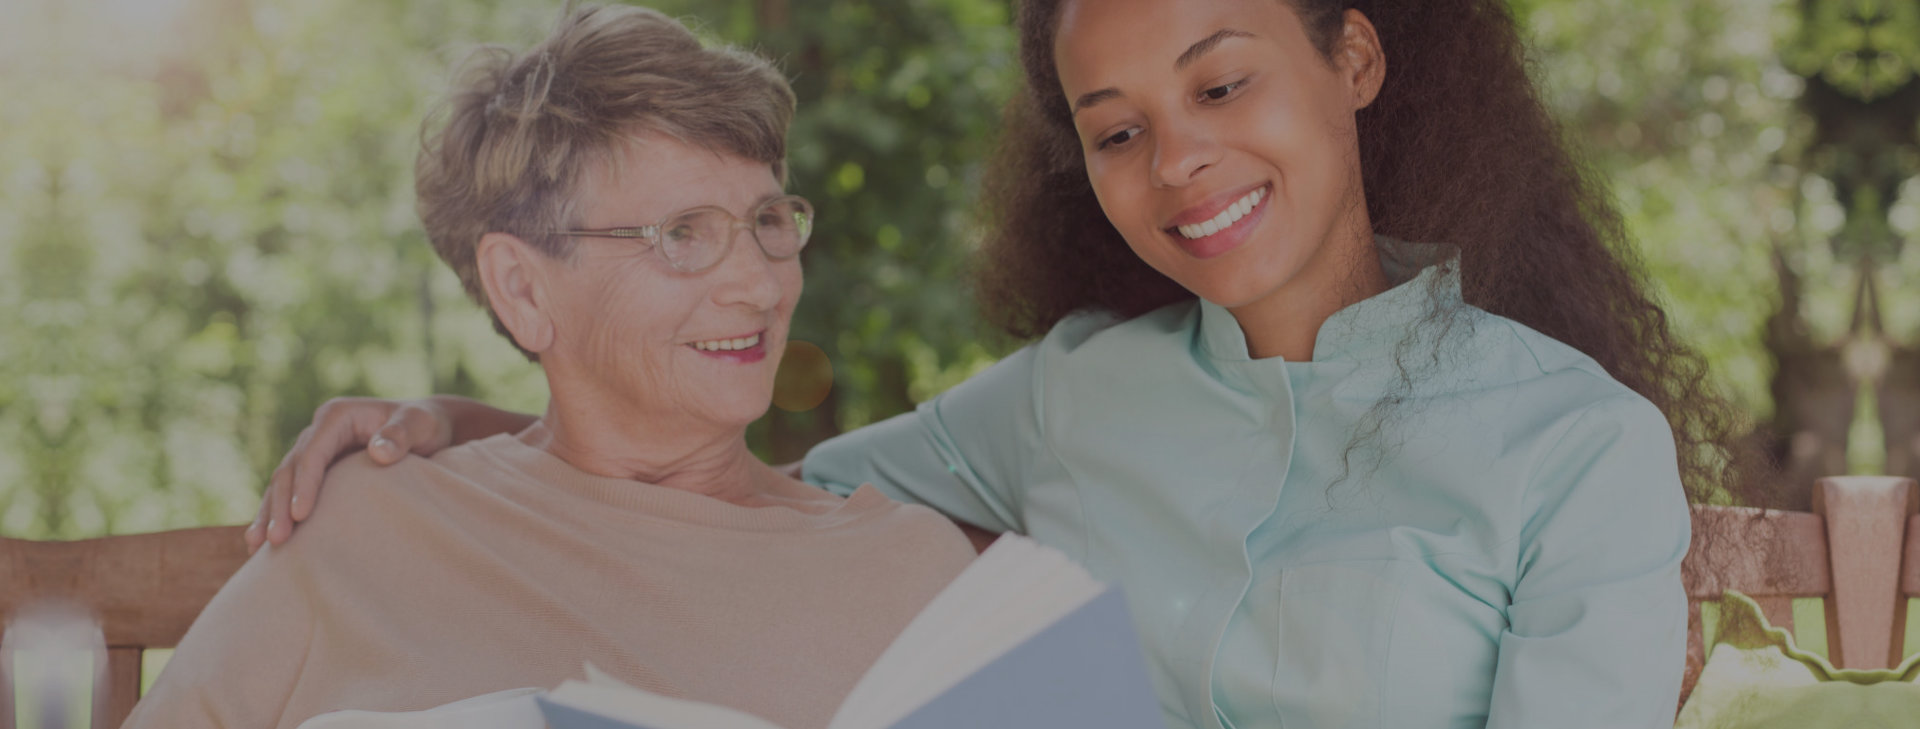 caregiver reading books with her patient